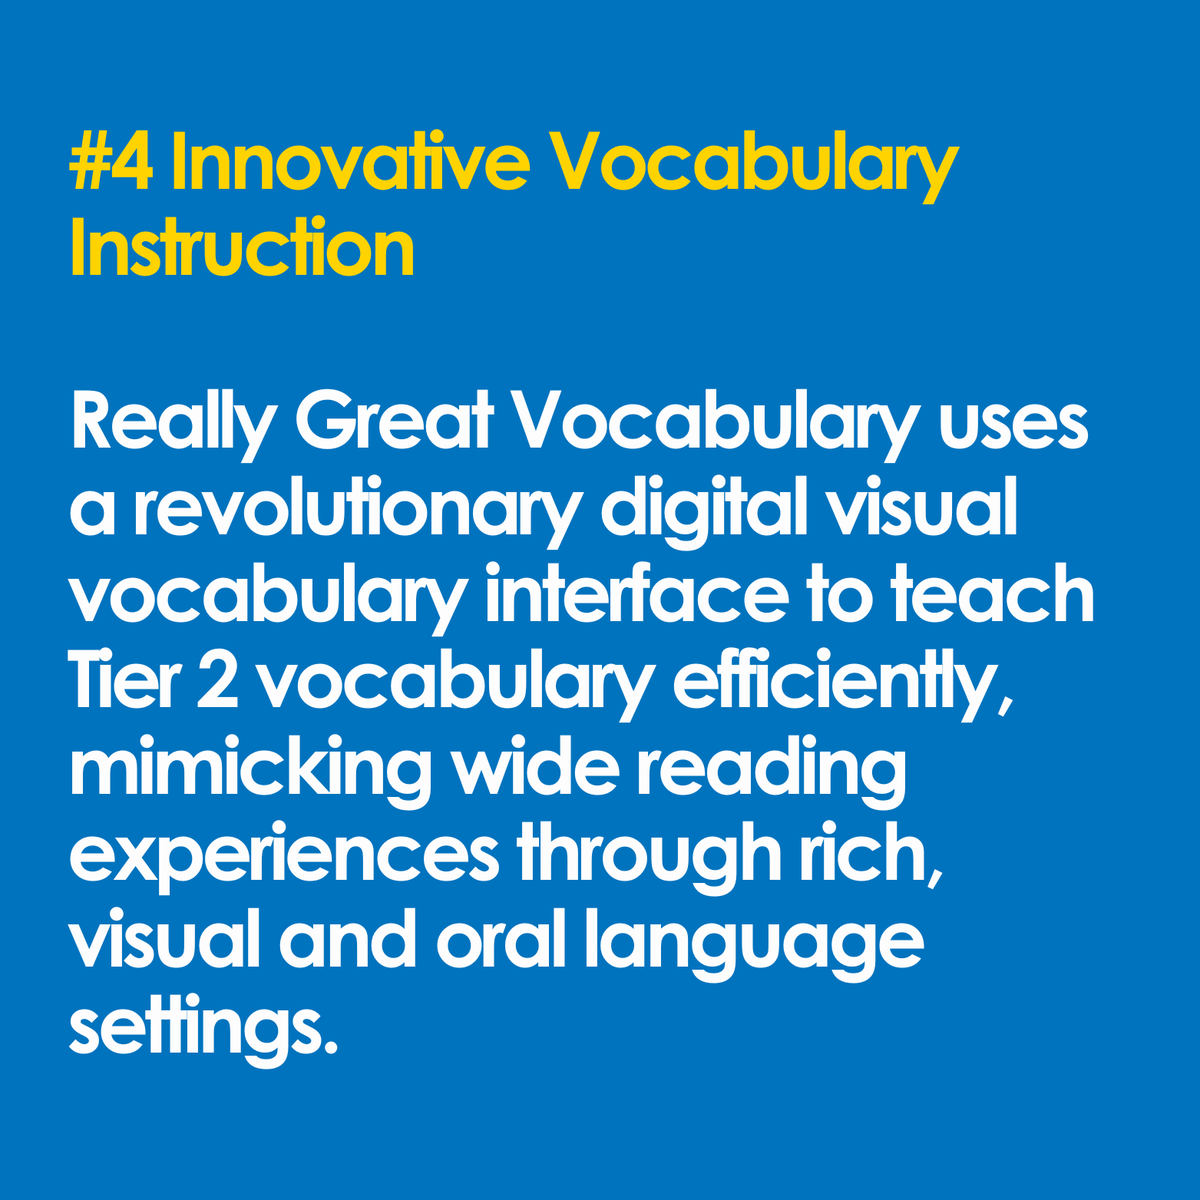 Really Great Vocabulary uses a revolutionary digital visual vocabulary interface to teach Tier 2 vocabulary efficiently, mimicking wide reading experiences through rich, visual and oral language settings. Learn more: hubs.ly/Q02sJSWW0